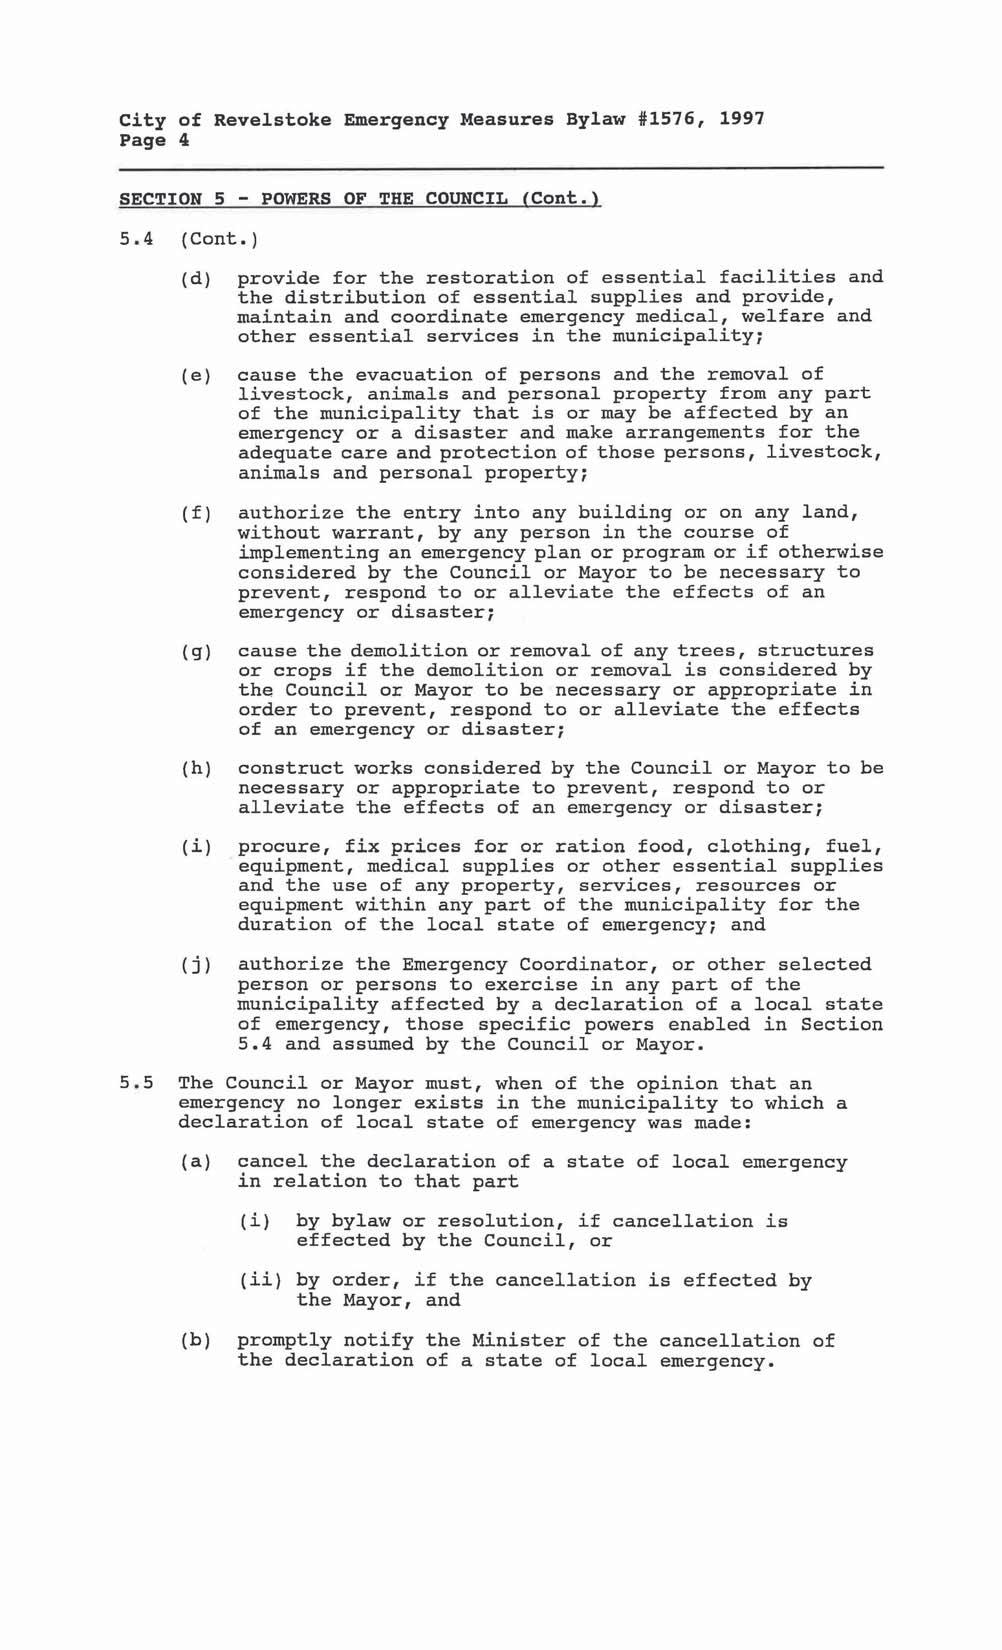 city of Reveletoke Emergency Measures Bylaw #1576, 1997 Page 4 SECTION 5 - PUWERS OF THE COUNCIL Cont. 5.4 (Cont.